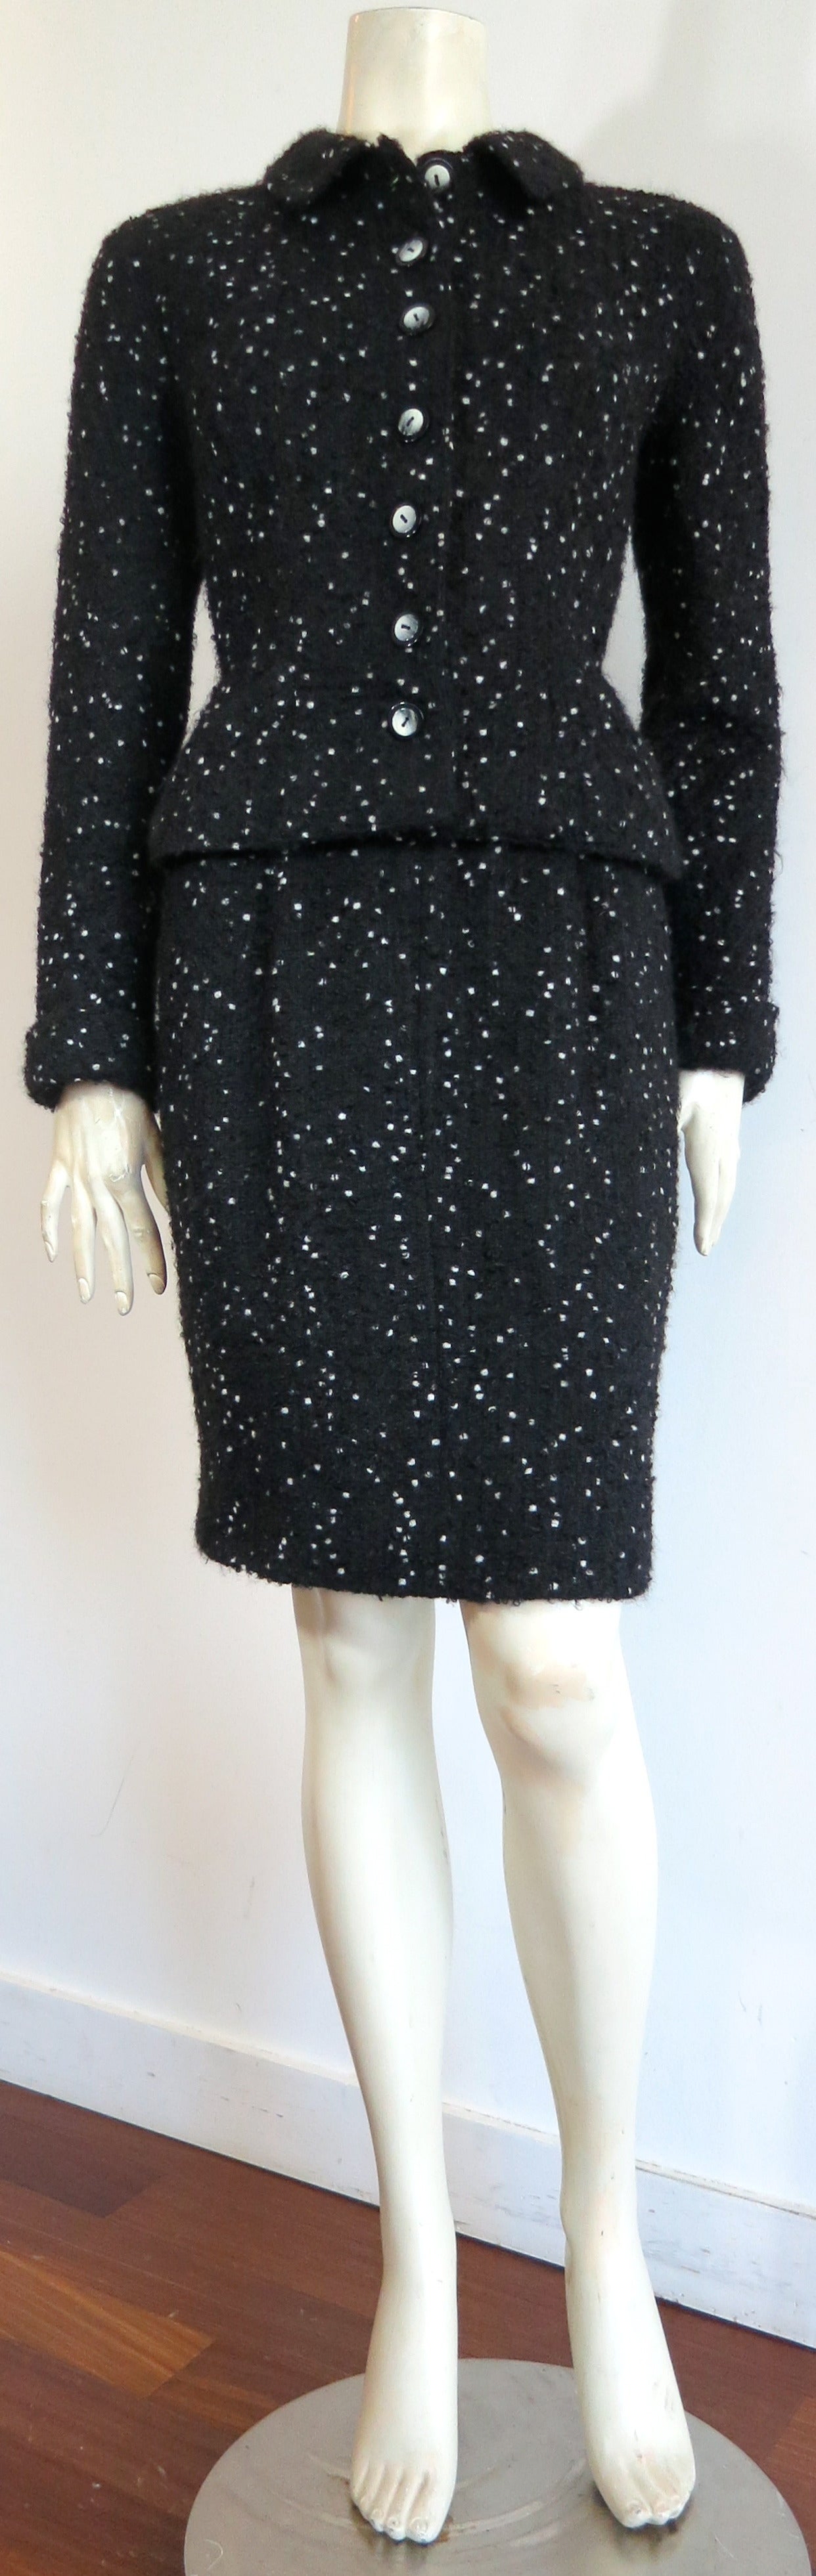 Great condition, 1980's VALENTINO Confetti bouclé 2pc. skirt suit.

Black , wool/mohair, bouclé fabrication with white 'confetti' speckle effects within the fabrication.  

The jacket features twin chest and waist level pockets with self-fabric